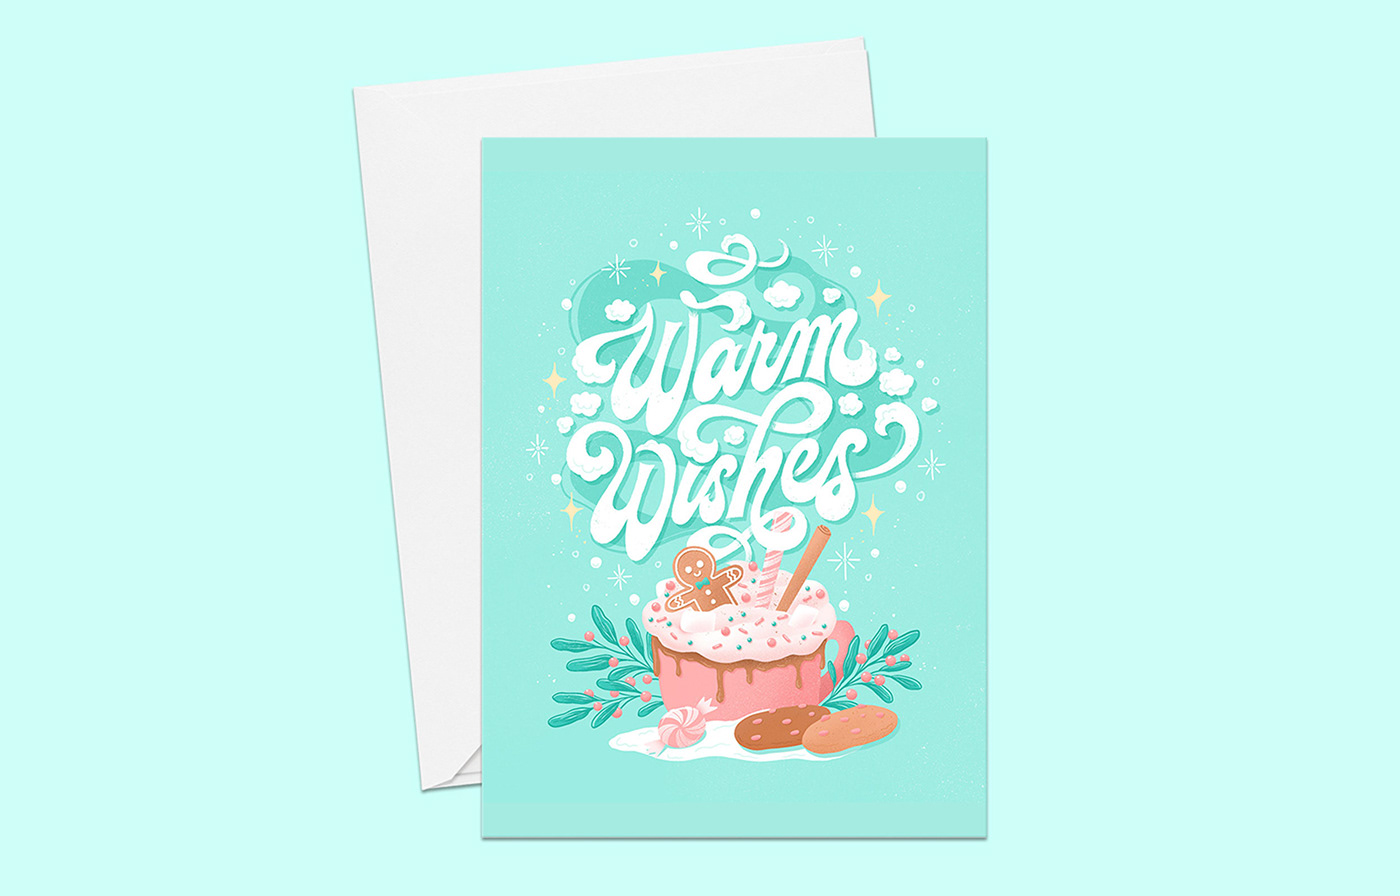 Festive greeting card featuring playful hand lettering inspired by hot chocolate 